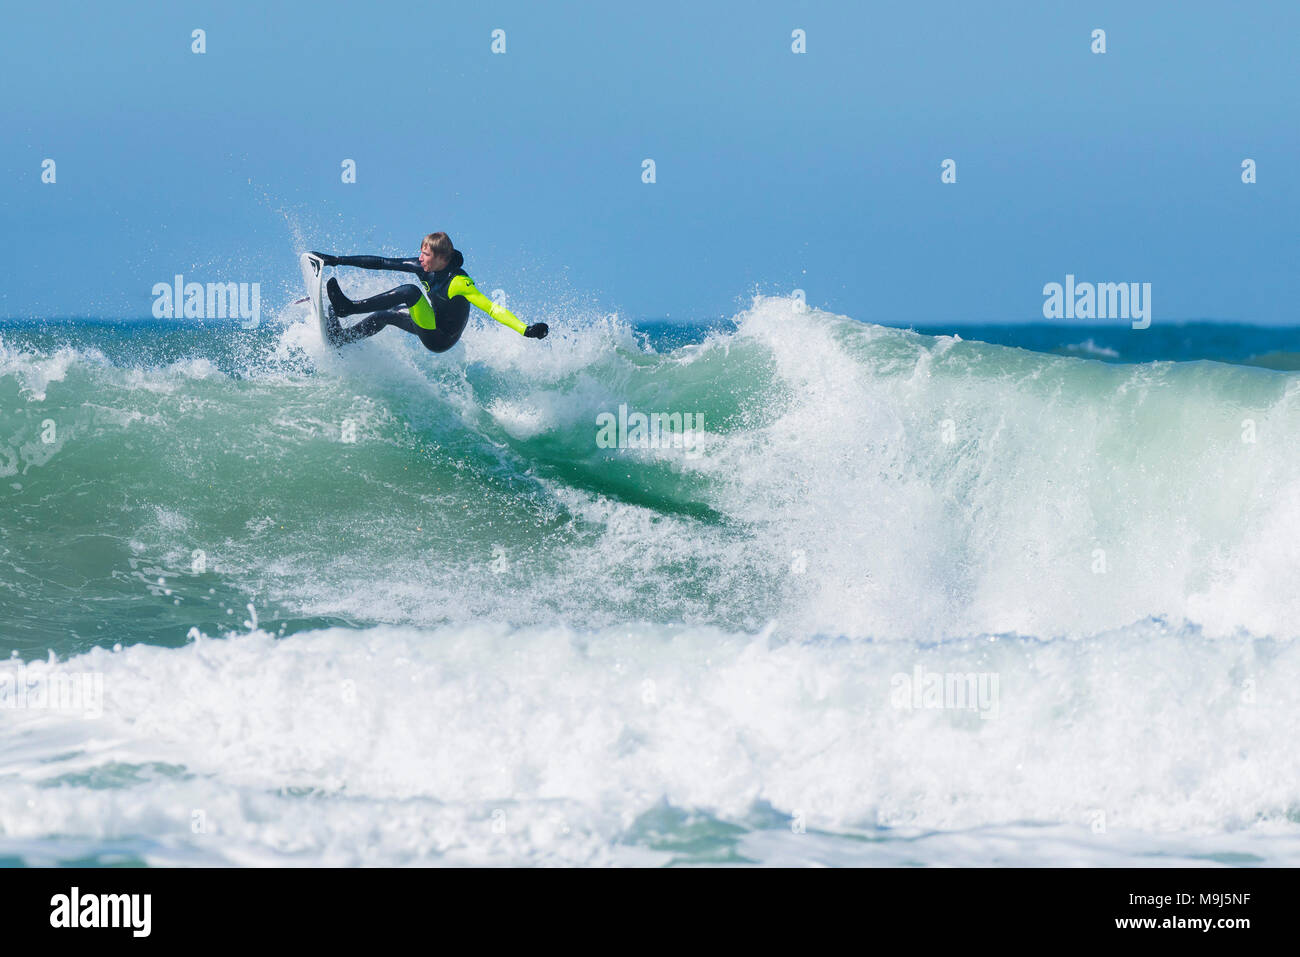 A surfer performing a spectacular trick at the top of a wave at Fistral in Newquay Cornwall. Stock Photo